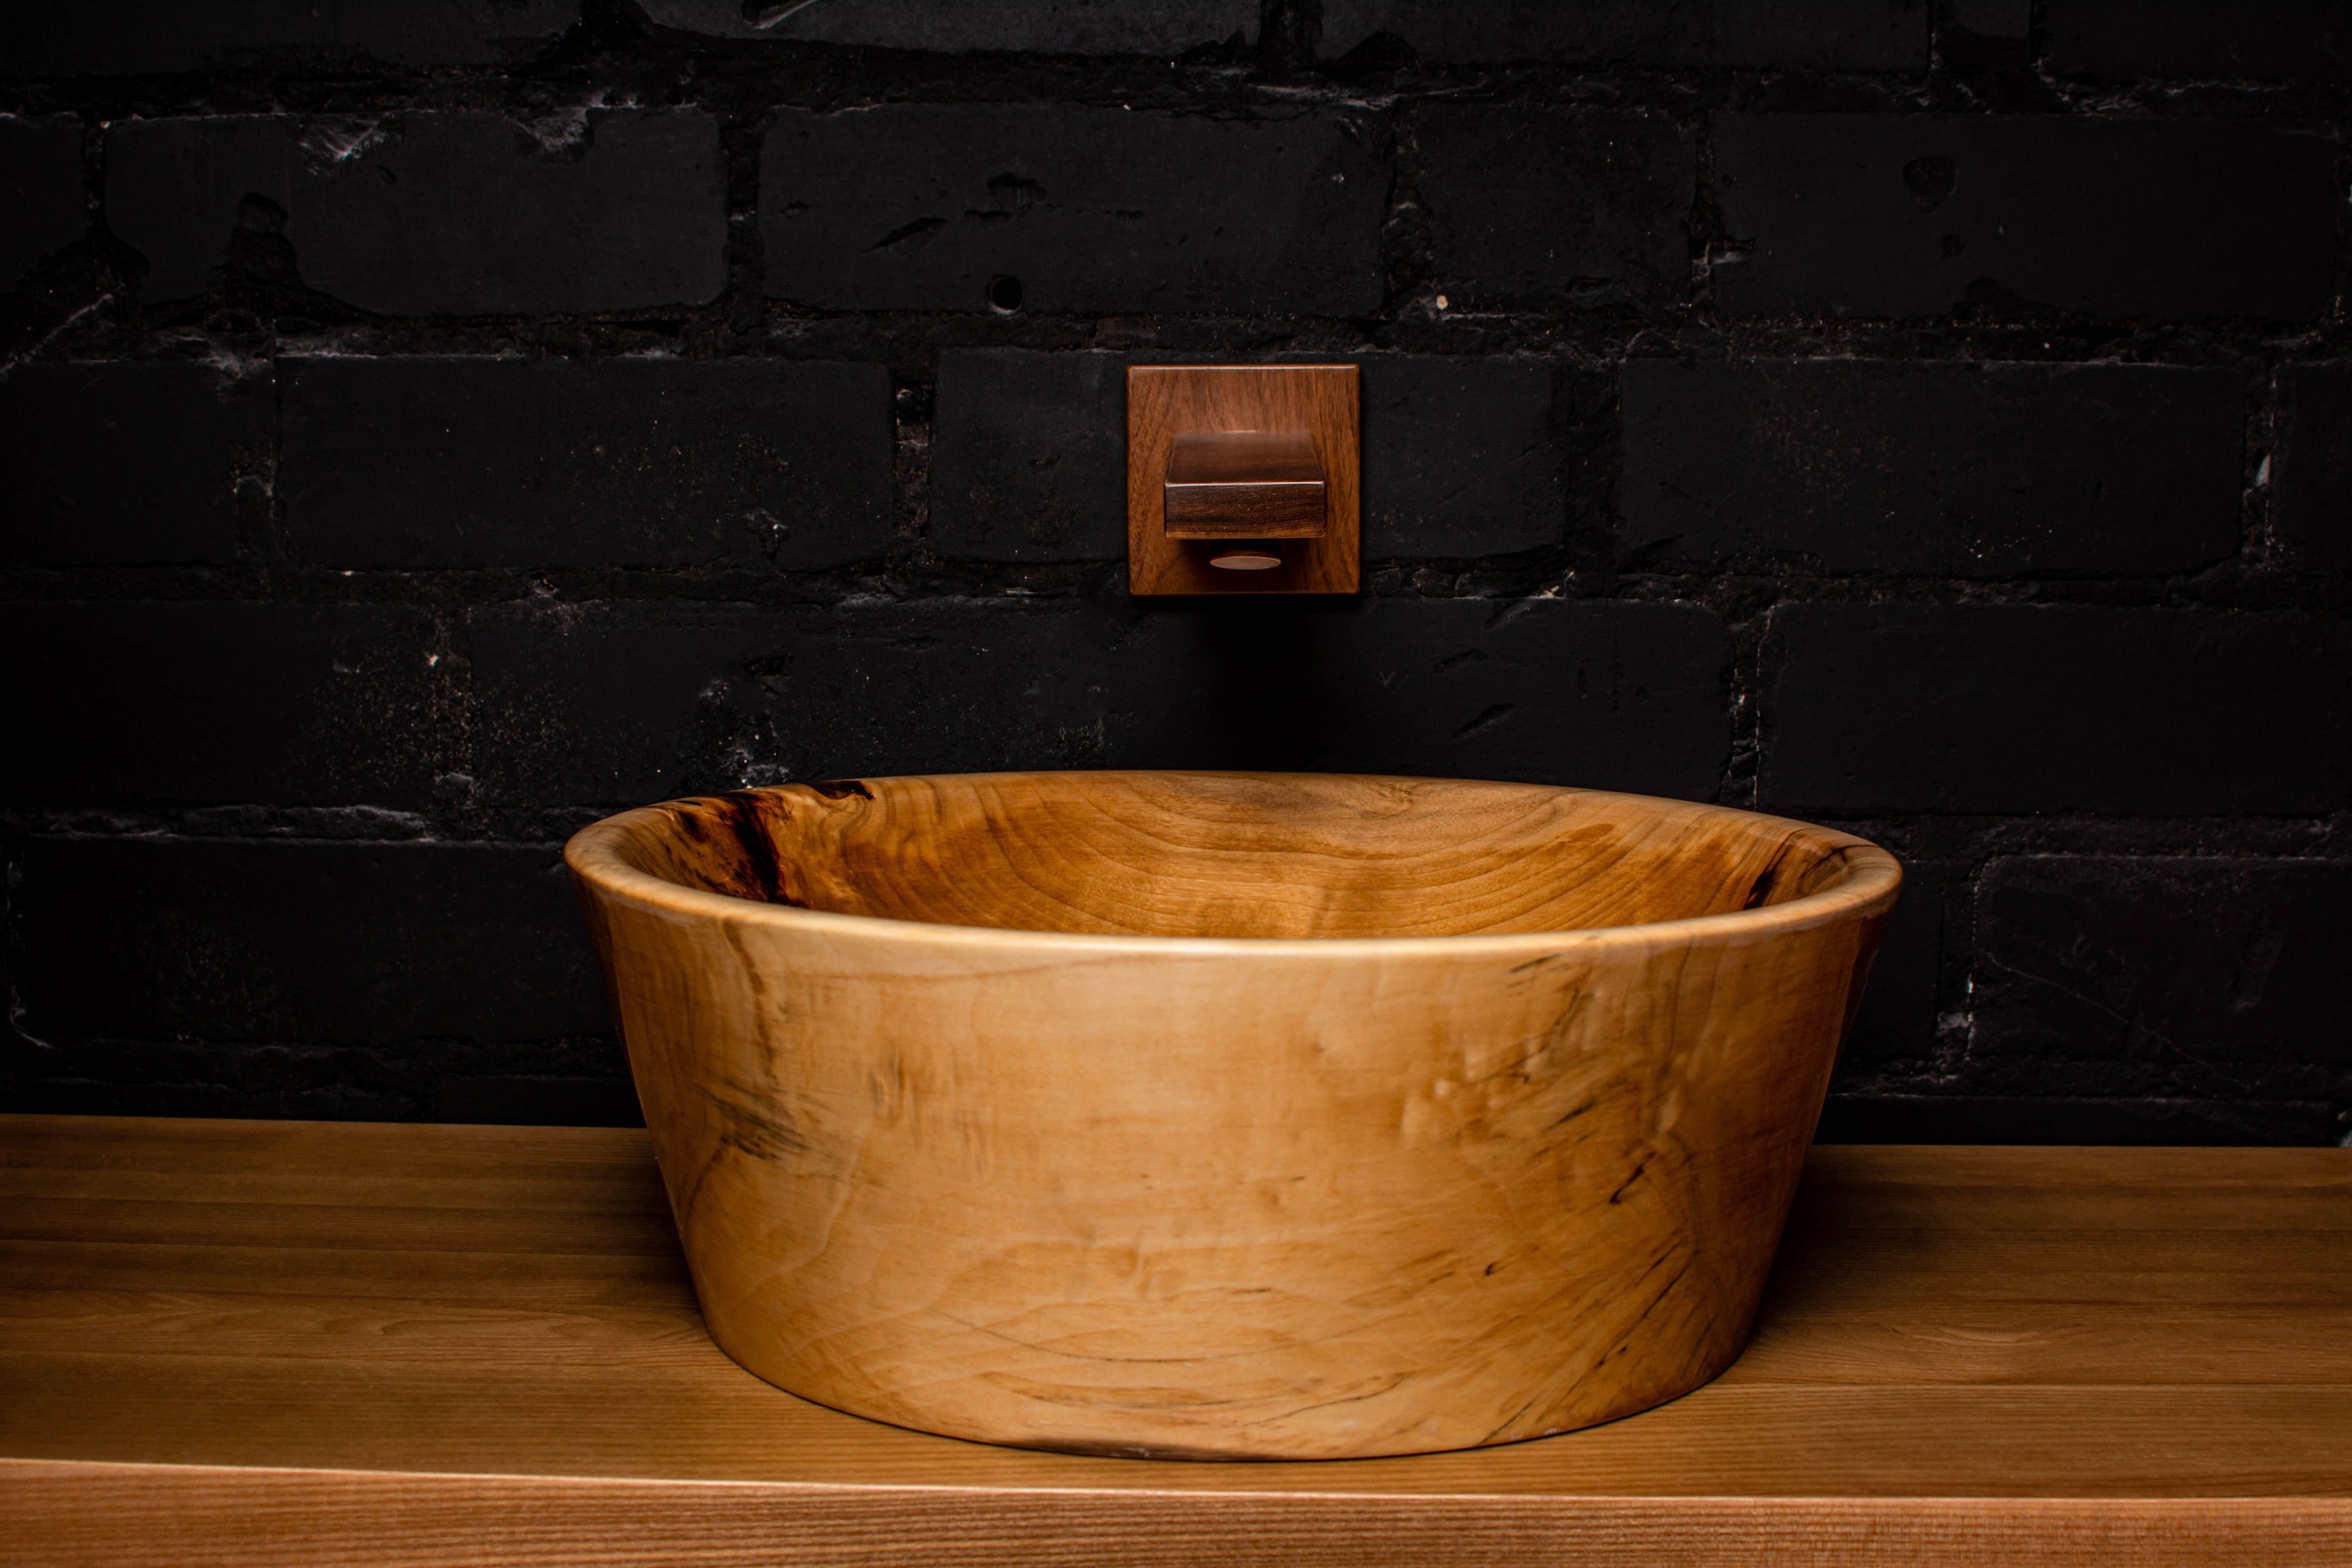 Exquisite Handcrafted Wooden Sink: Elevate Your Bathroom Decor with Timeless Luxury